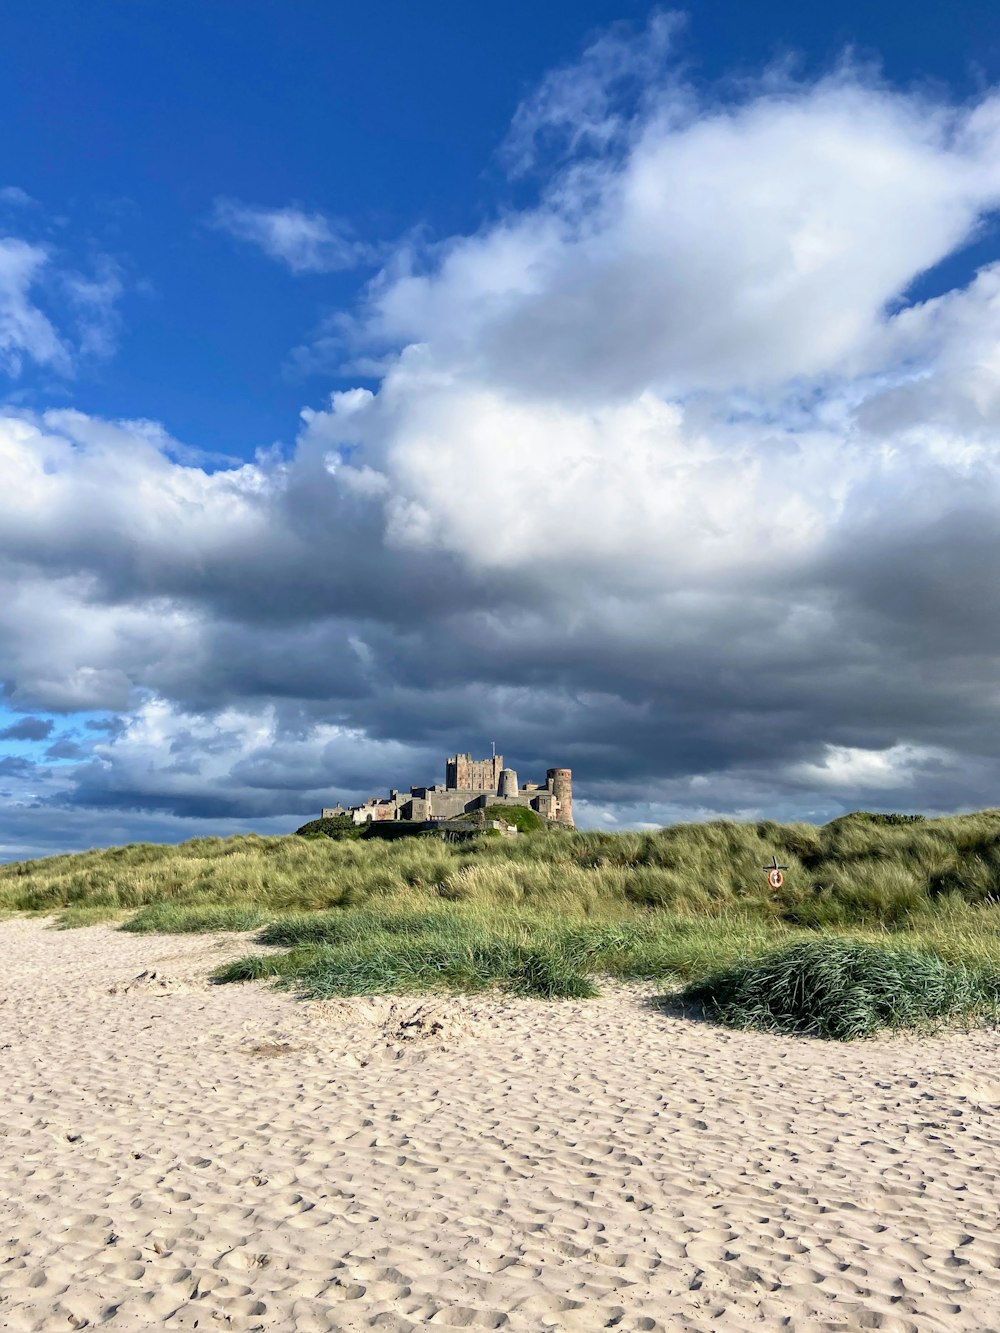 a castle sitting on top of a sandy beach